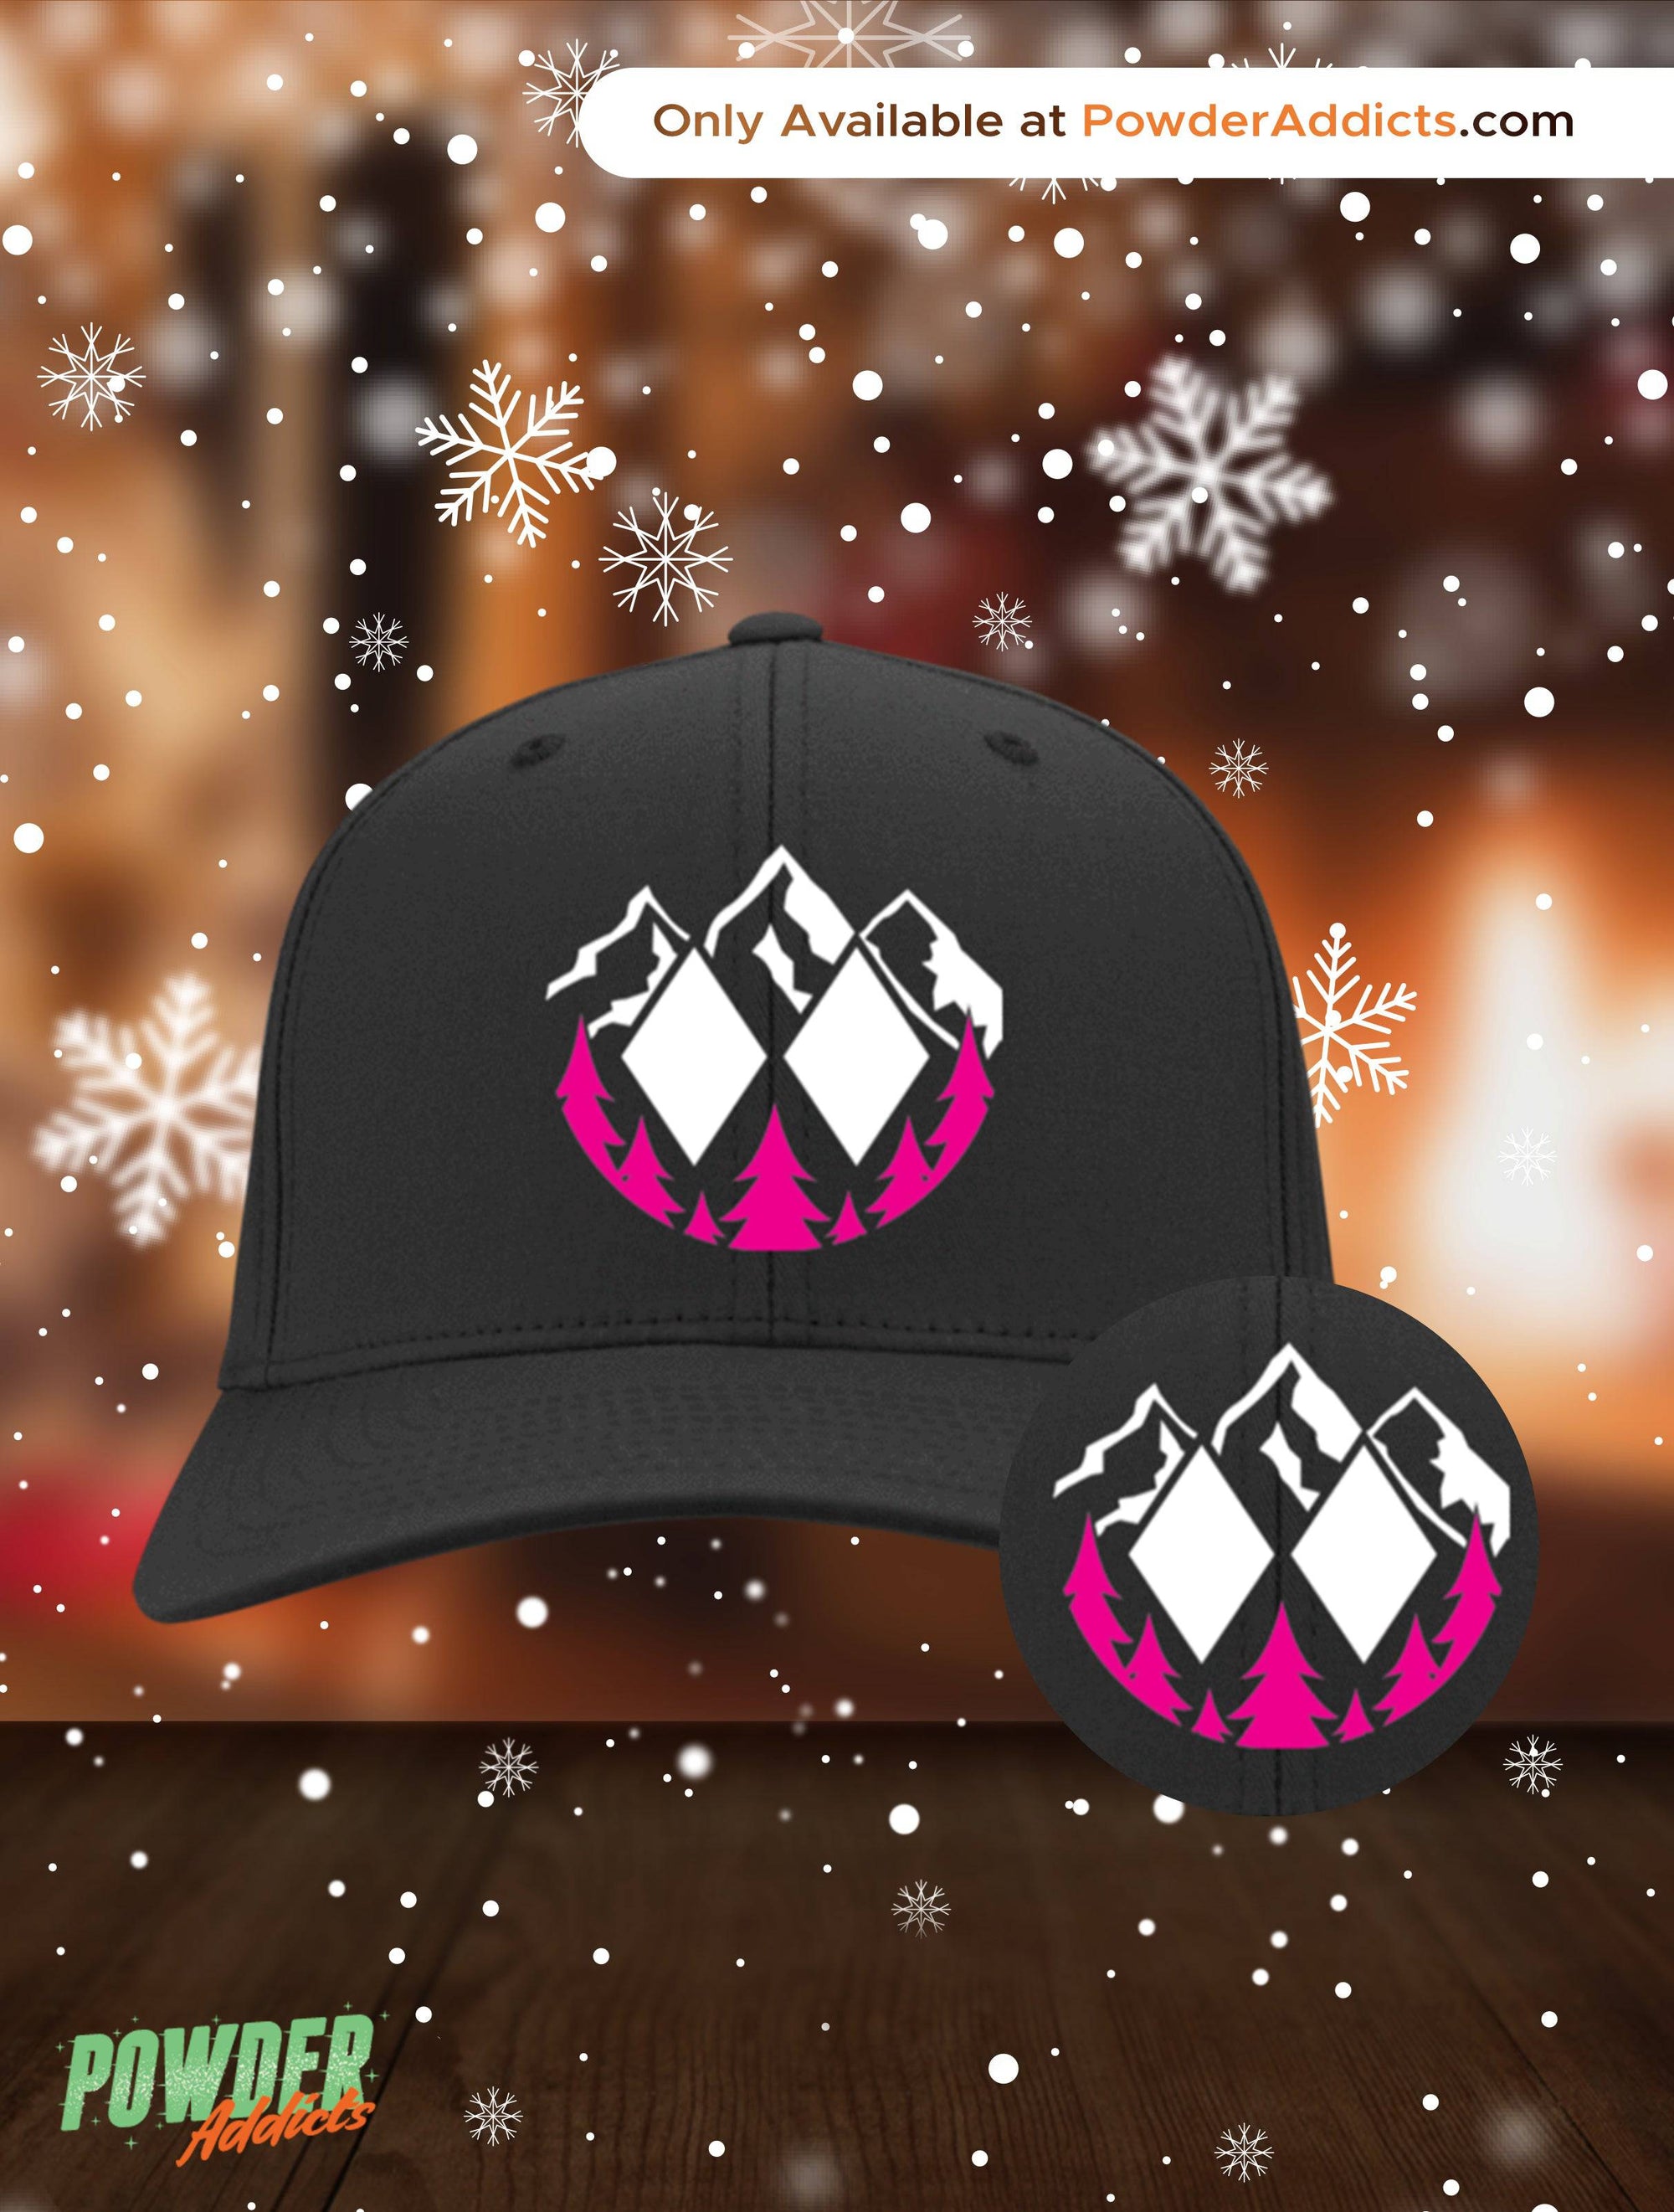 Black Diamonds Are A Girl's Best Friend Caps and Beanies - Powderaddicts